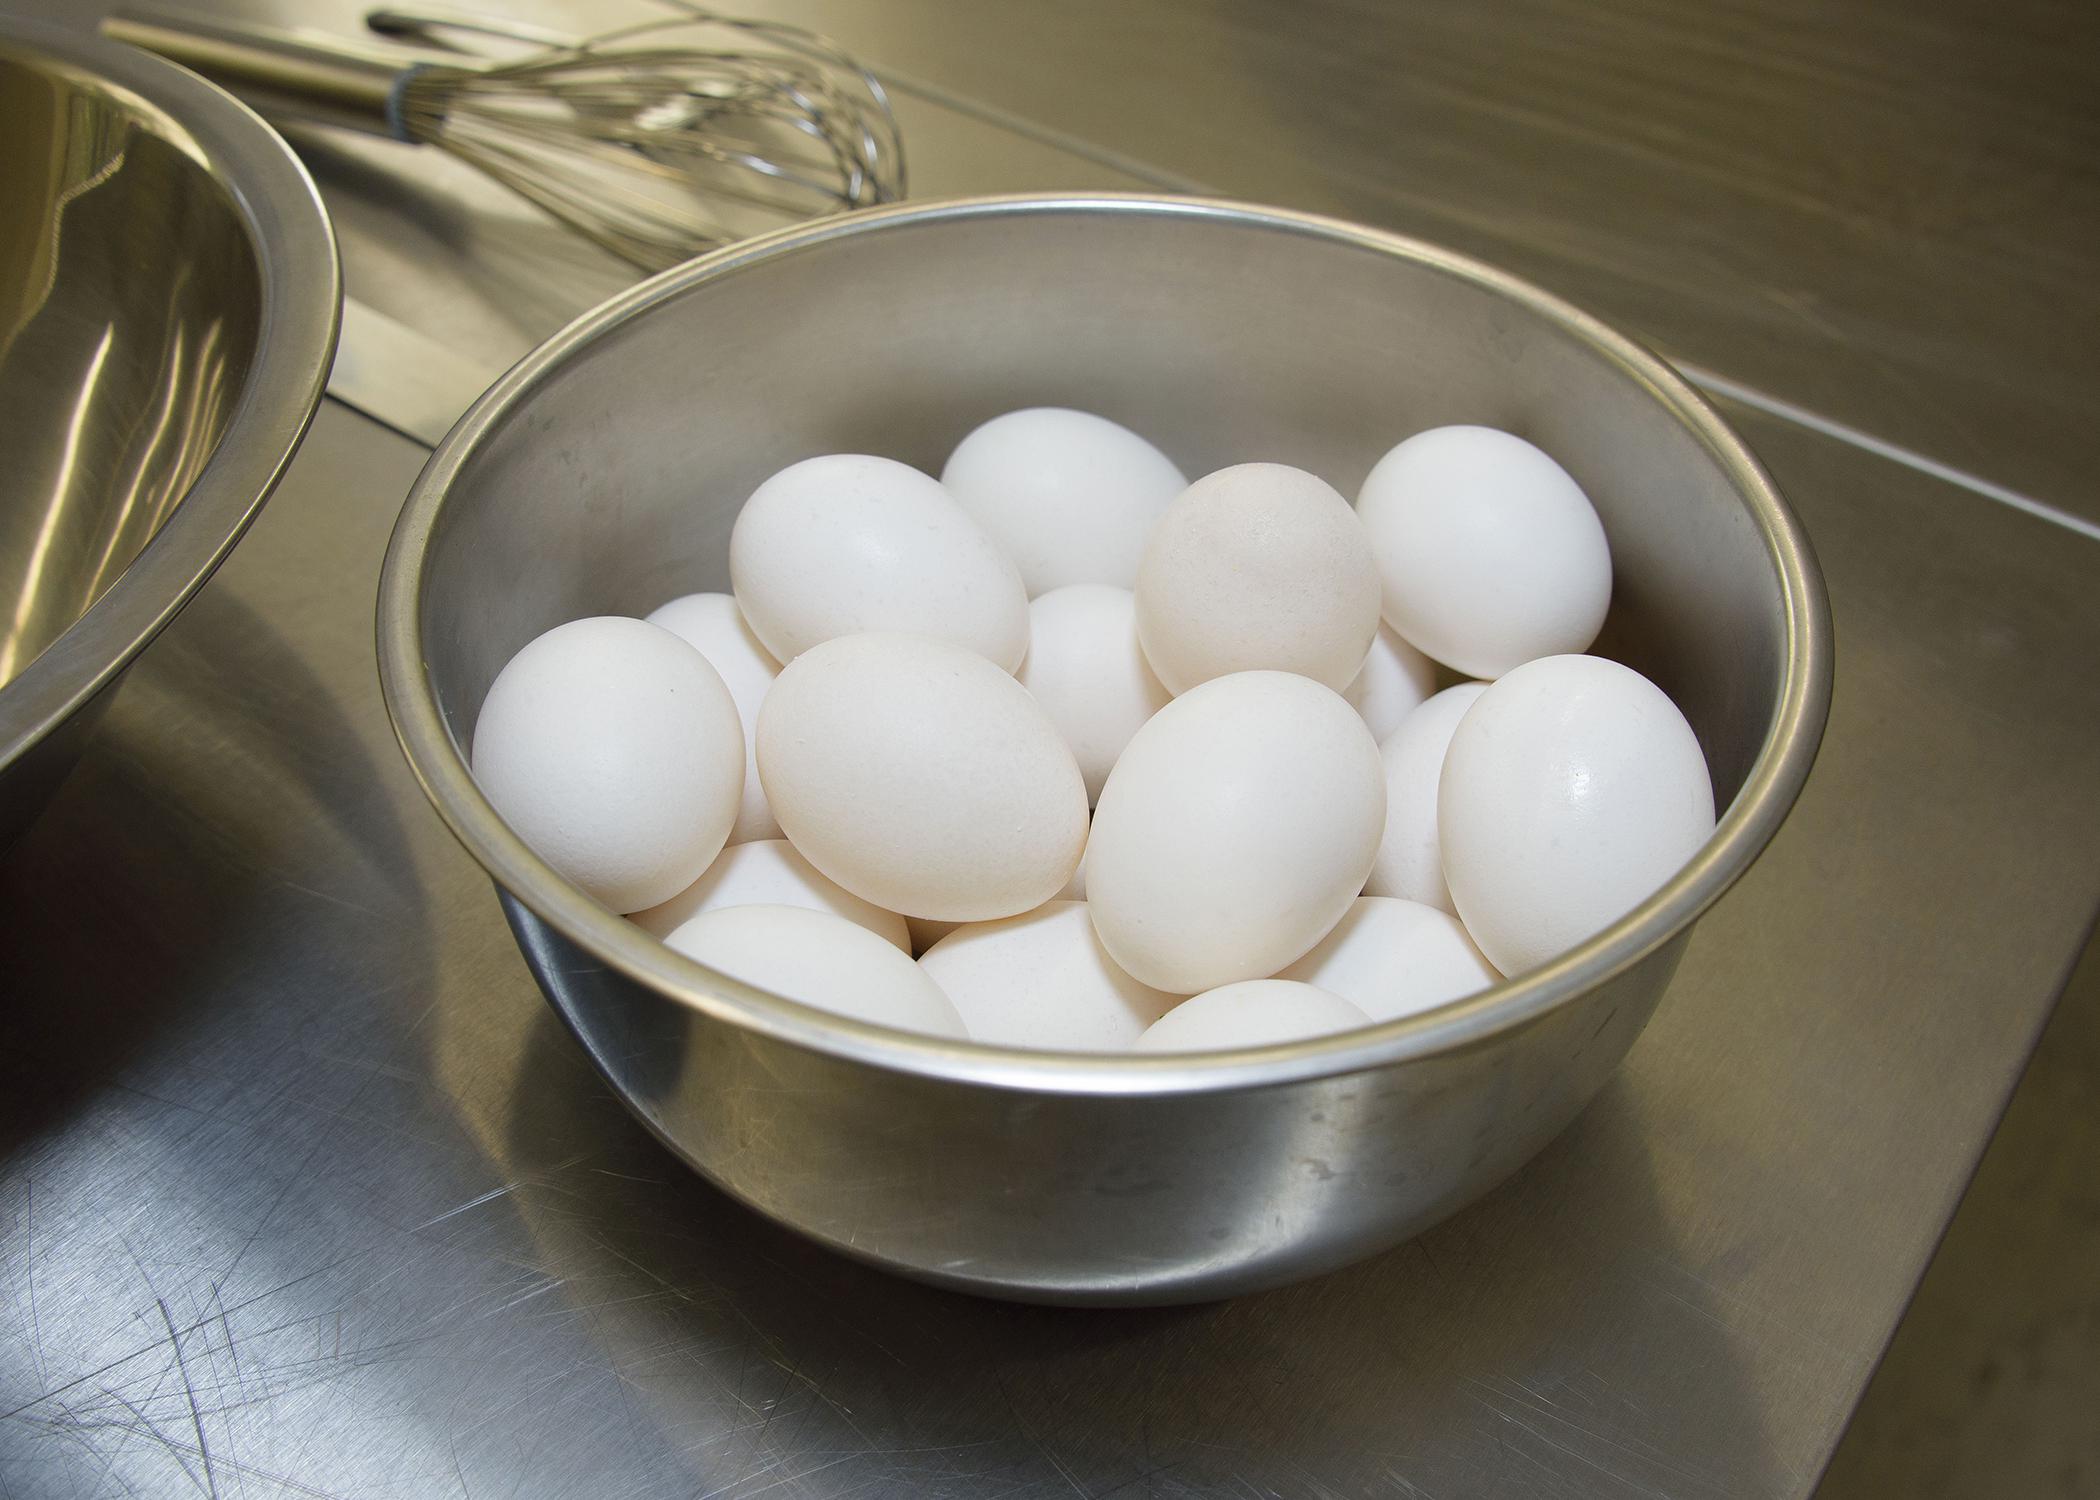 White eggs fill a metal bowl on a countertop.